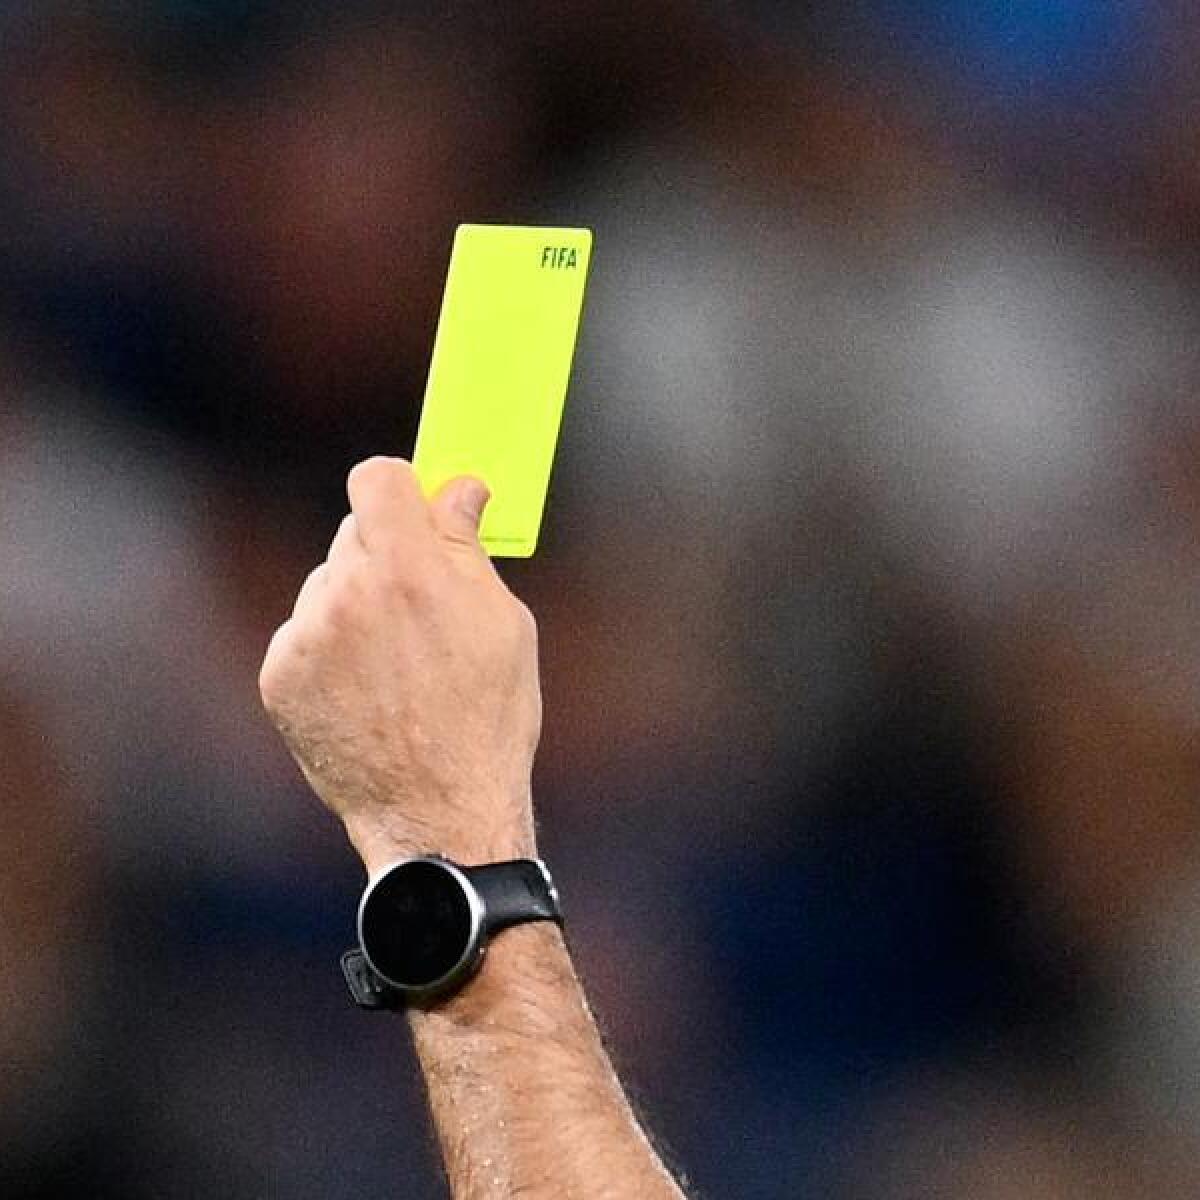 A referee holds a yellow card at a match not related to the arrests.